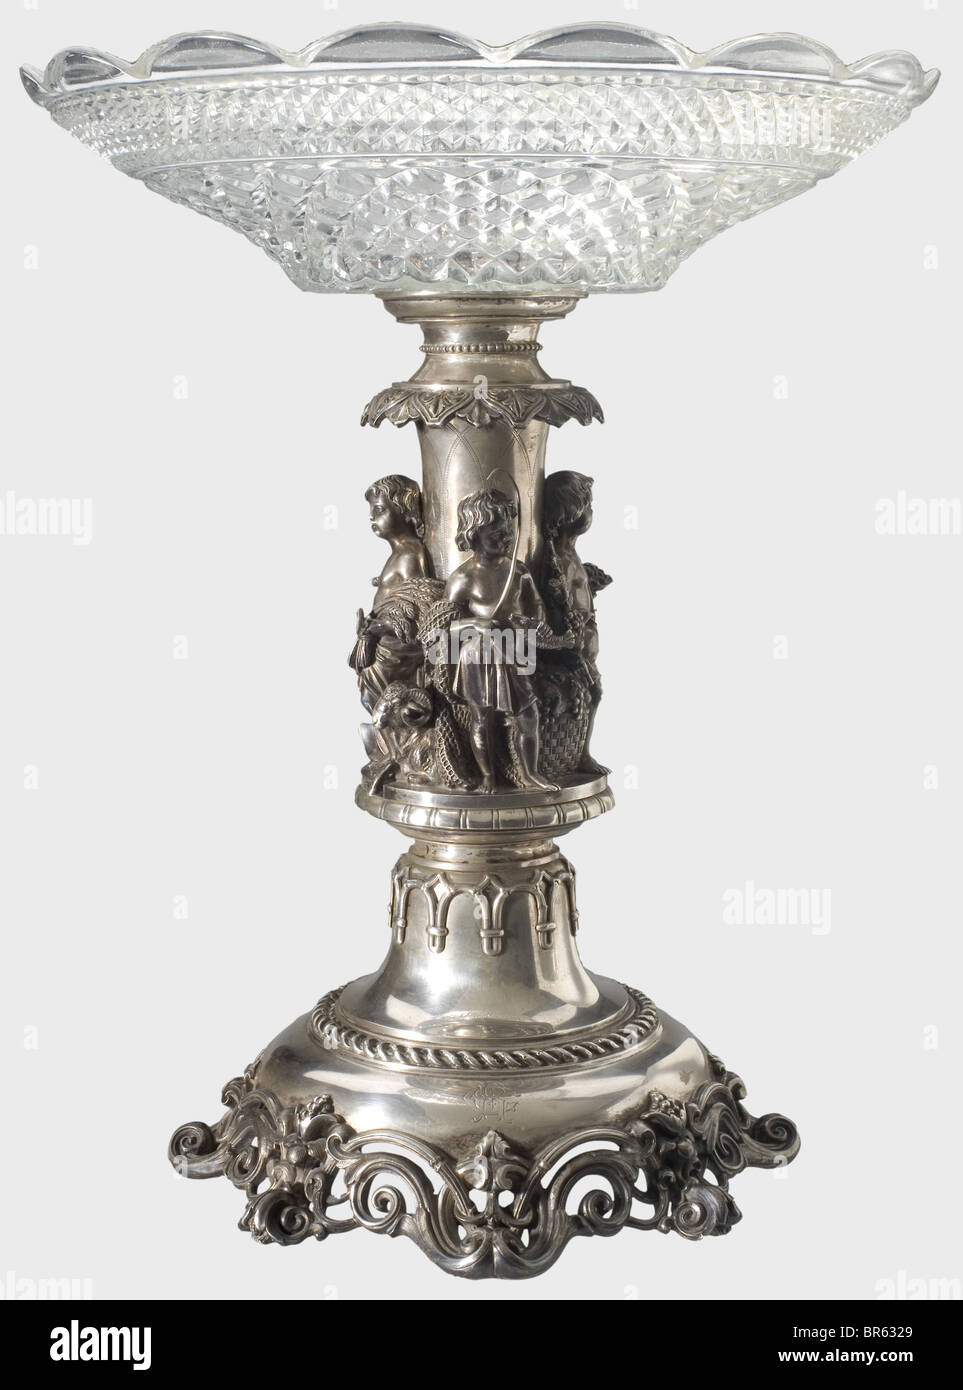 A tazza centrepiece, ca. 1870. Silver foot (no hallmarks). The stem with four three-dimensional genii symbolising fishing, viticulture, hunting and crop/livestock farming. The foot with engraved cipher 'CR'. Height of the stem 36 cm, weight ca. 1750 g. Glass bowl supplemented by moulded glass, diameter 35 cm. fine arts, people, 19th century, handicrafts, handcraft, craft, object, objects, stills, clipping, clippings, cut out, cut-out, cut-outs, vessel, vessels, Artist's Copyright has not to be cleared Stock Photo